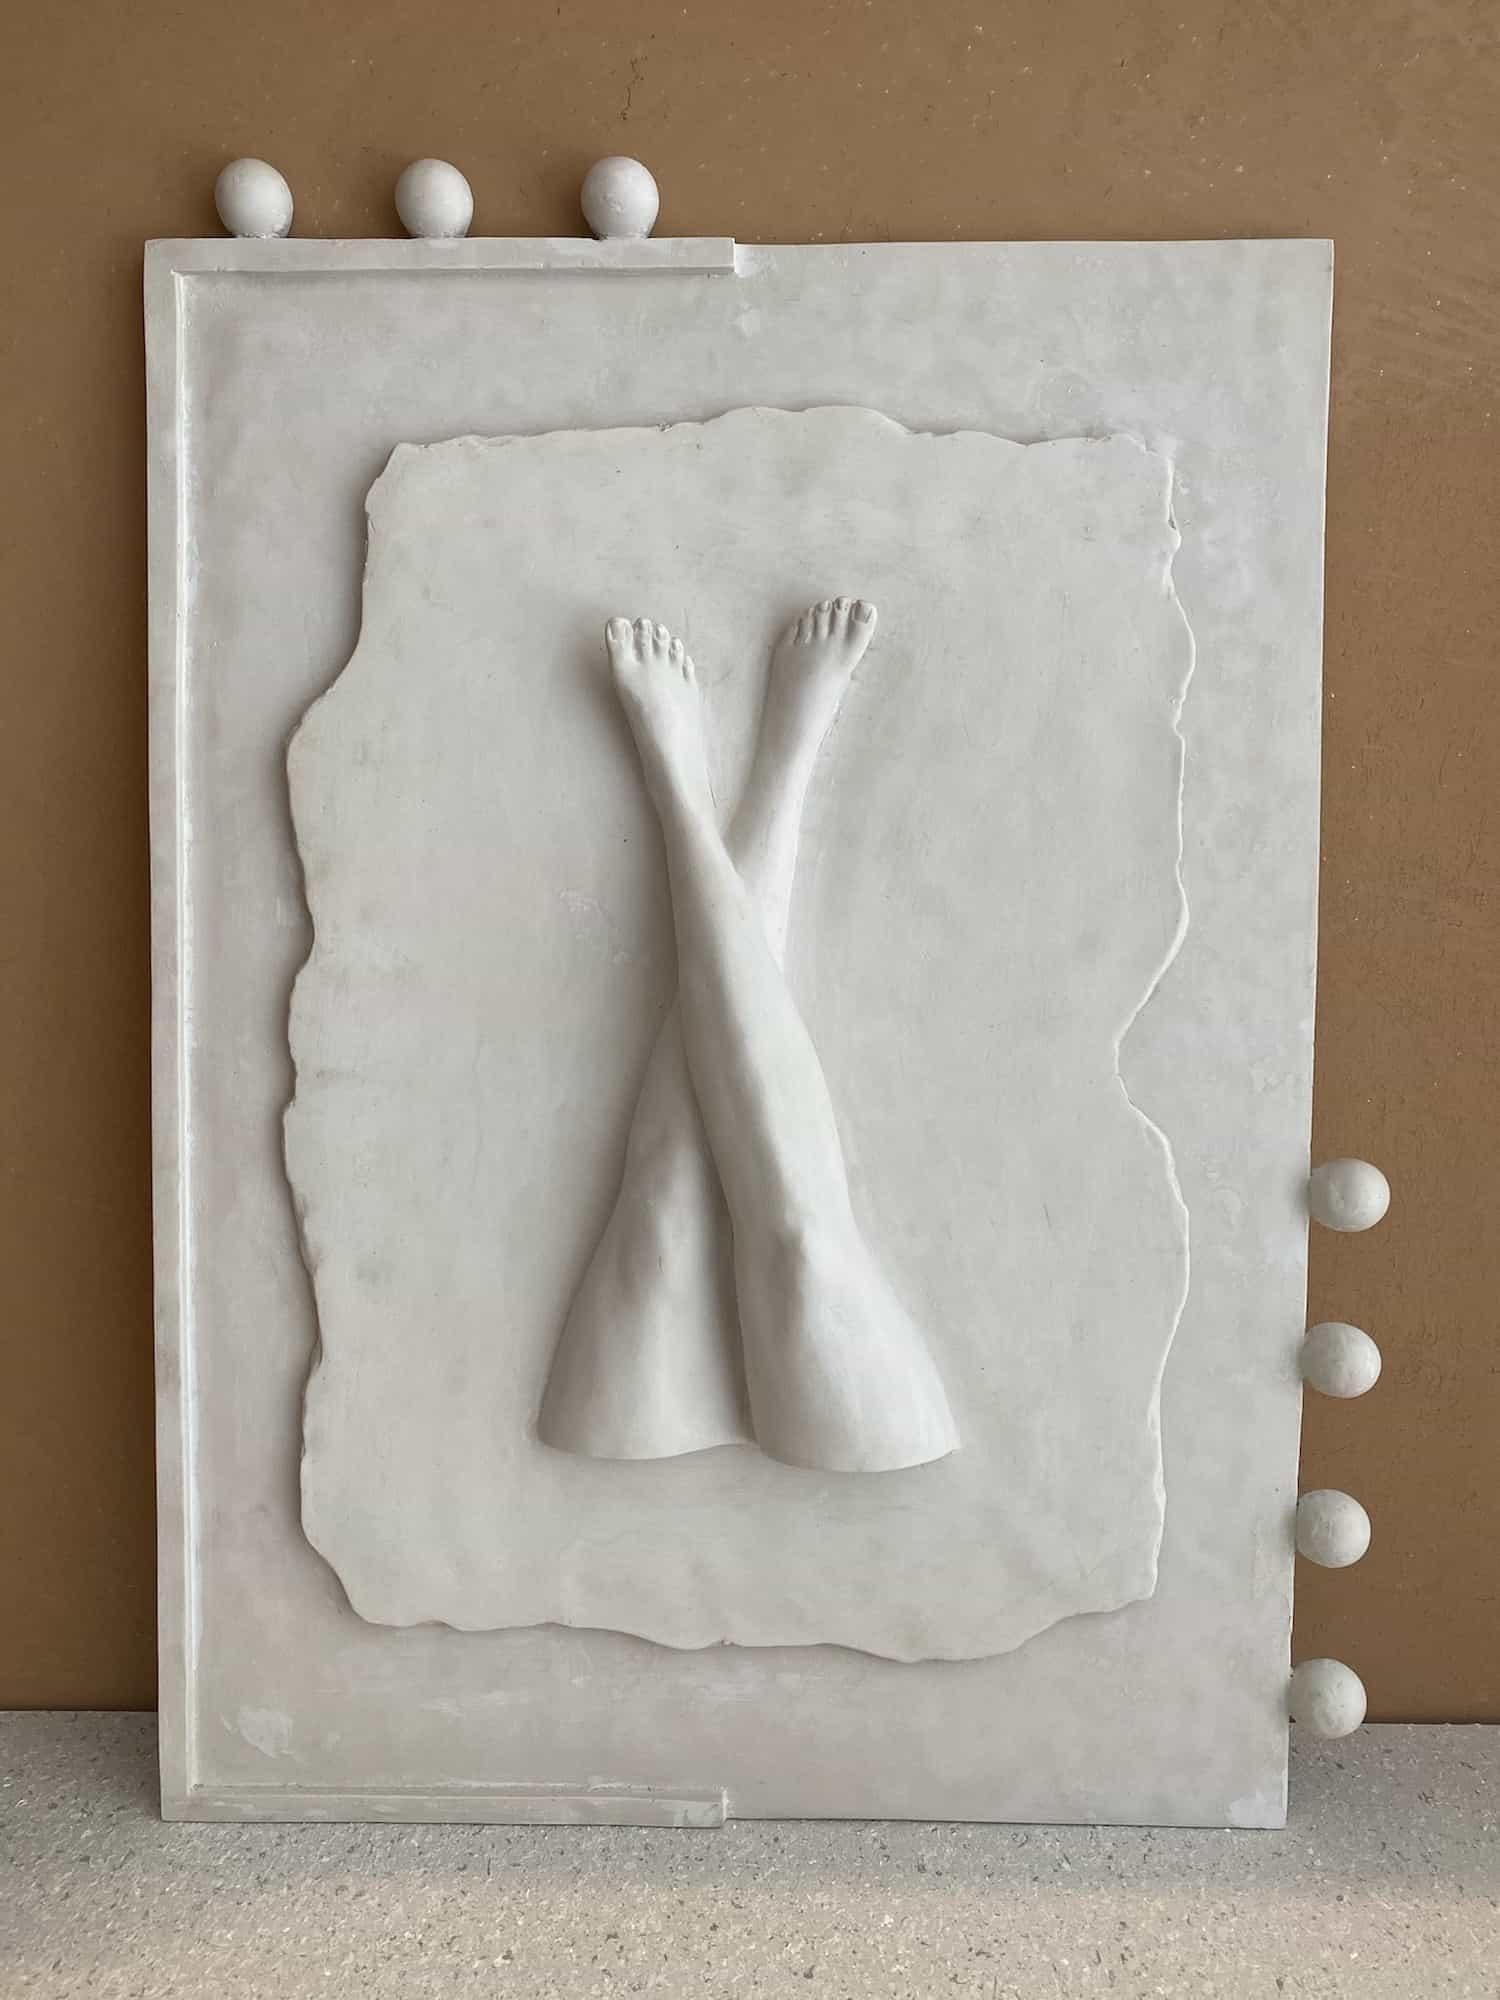 Object No.26 wall piece by Marcela Cure
Dimensions: W 61.5 x D 10 x H 82 cm
Materials: Resin and stone composite

This collection is inspired by the delicate curves of the female body, displaying soothing pieces that evoke effortless